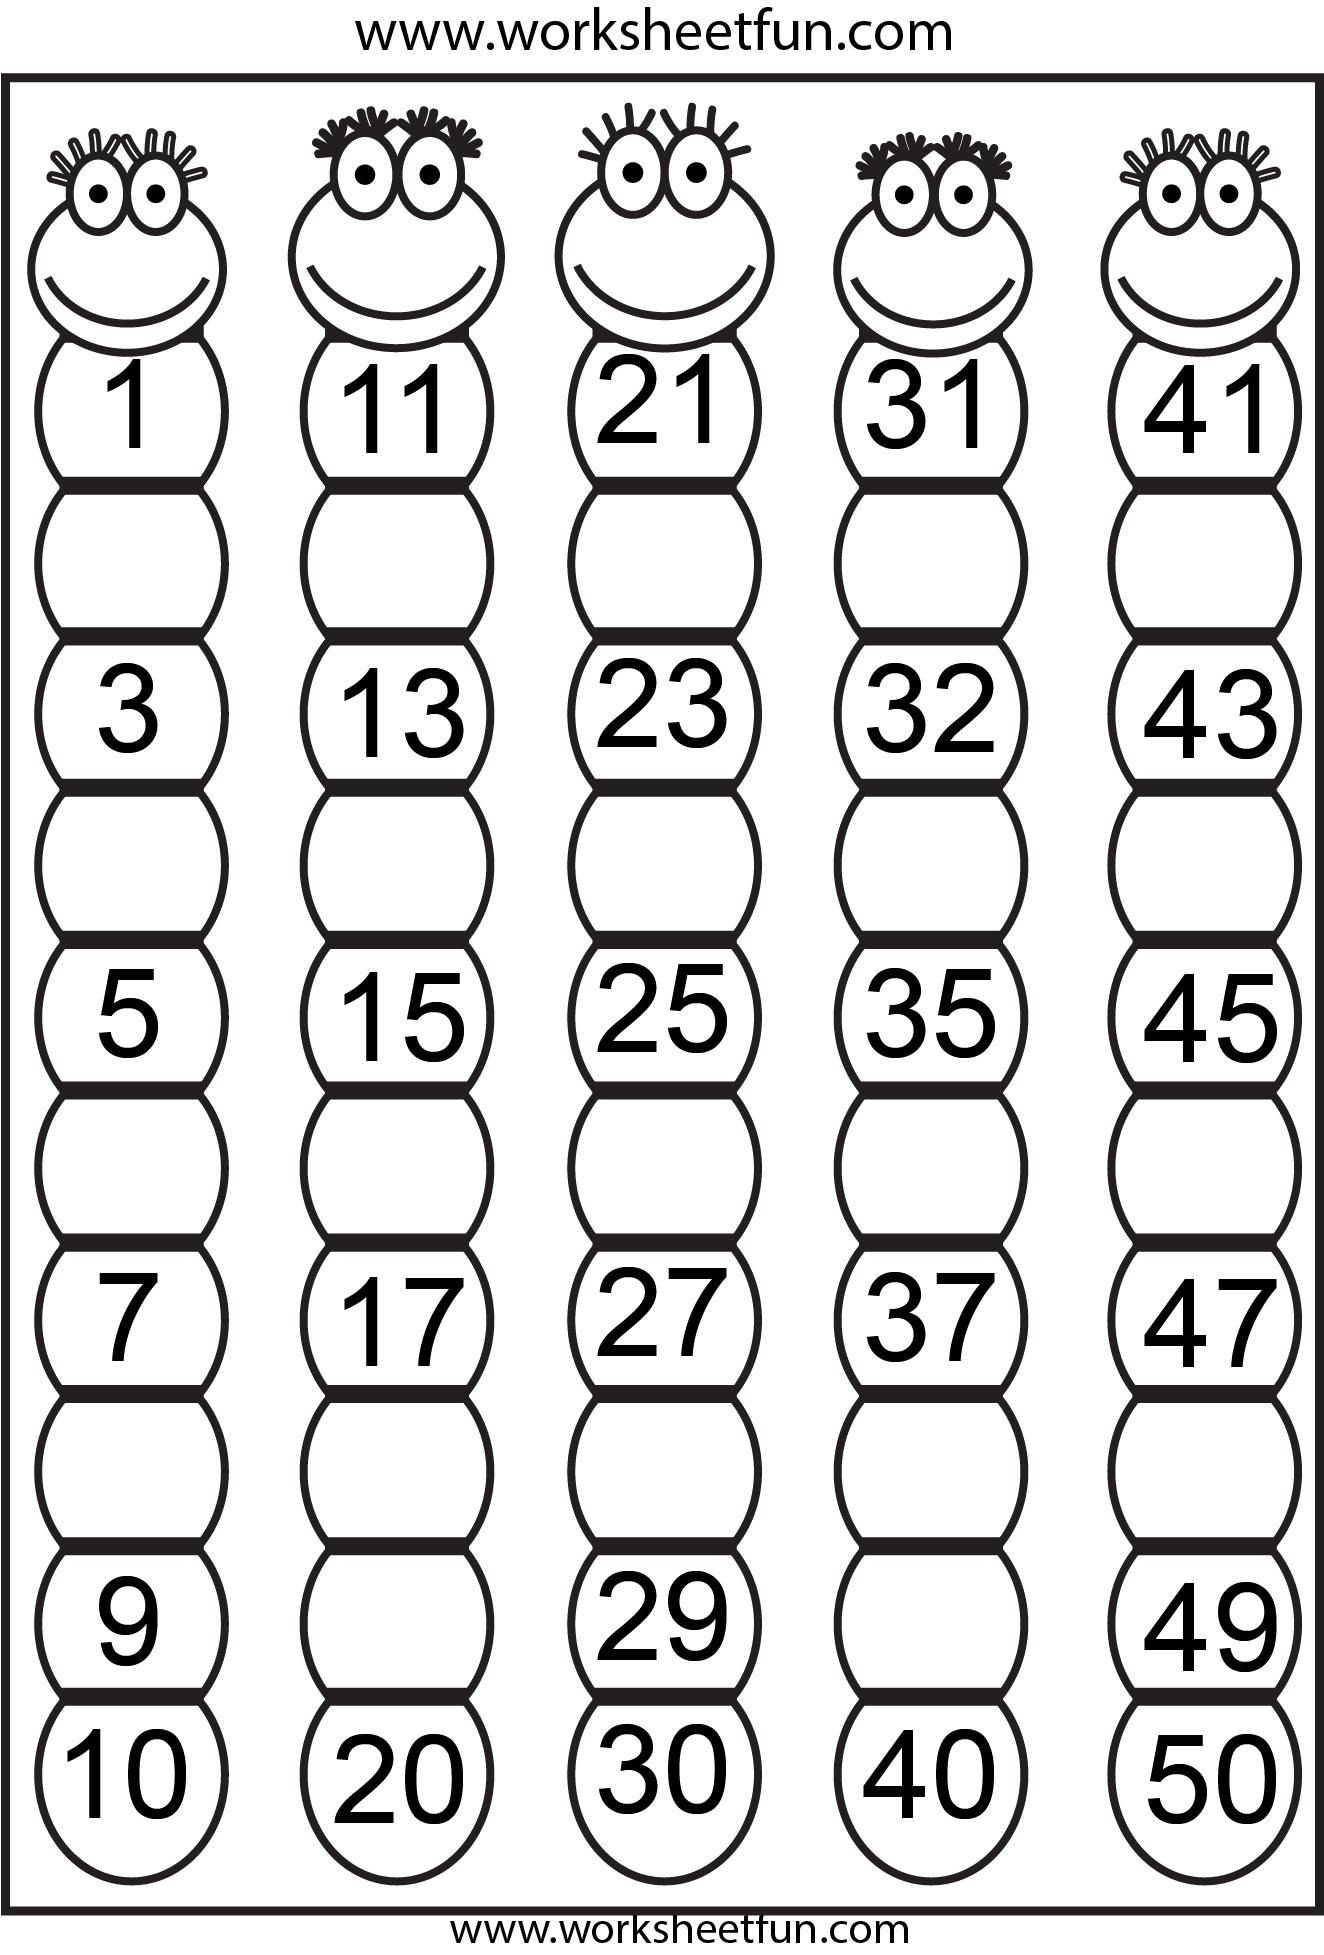 Tions of free worksheets like this one Missing numbers (1